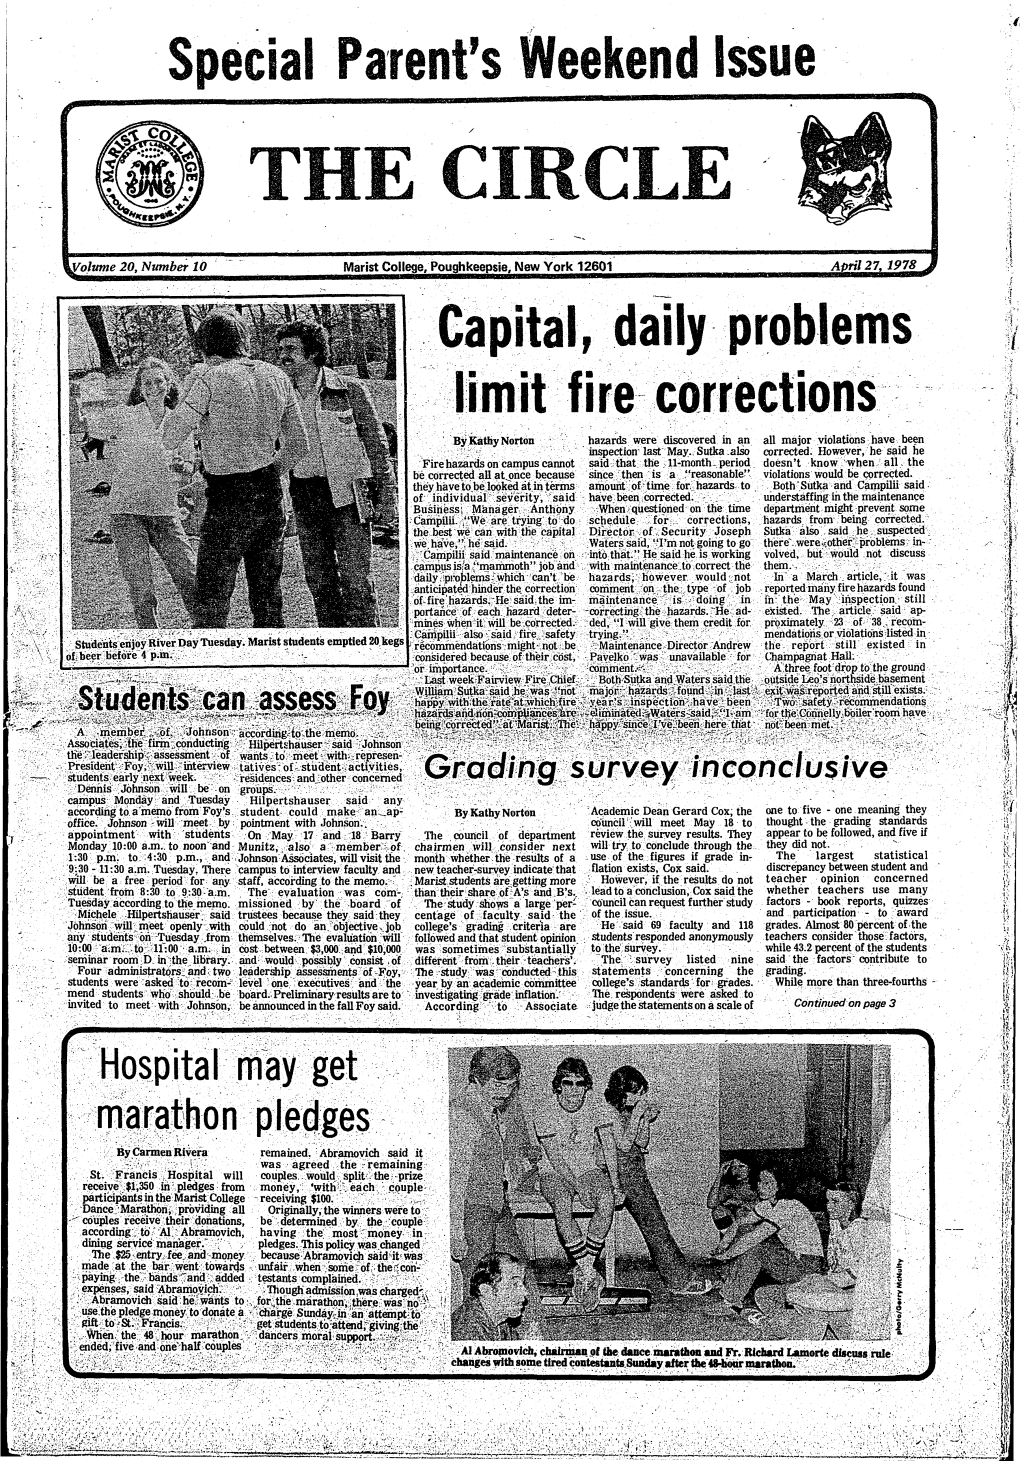 Special Parent's Weekend Issue Capital, Daily Problems Limit Fire